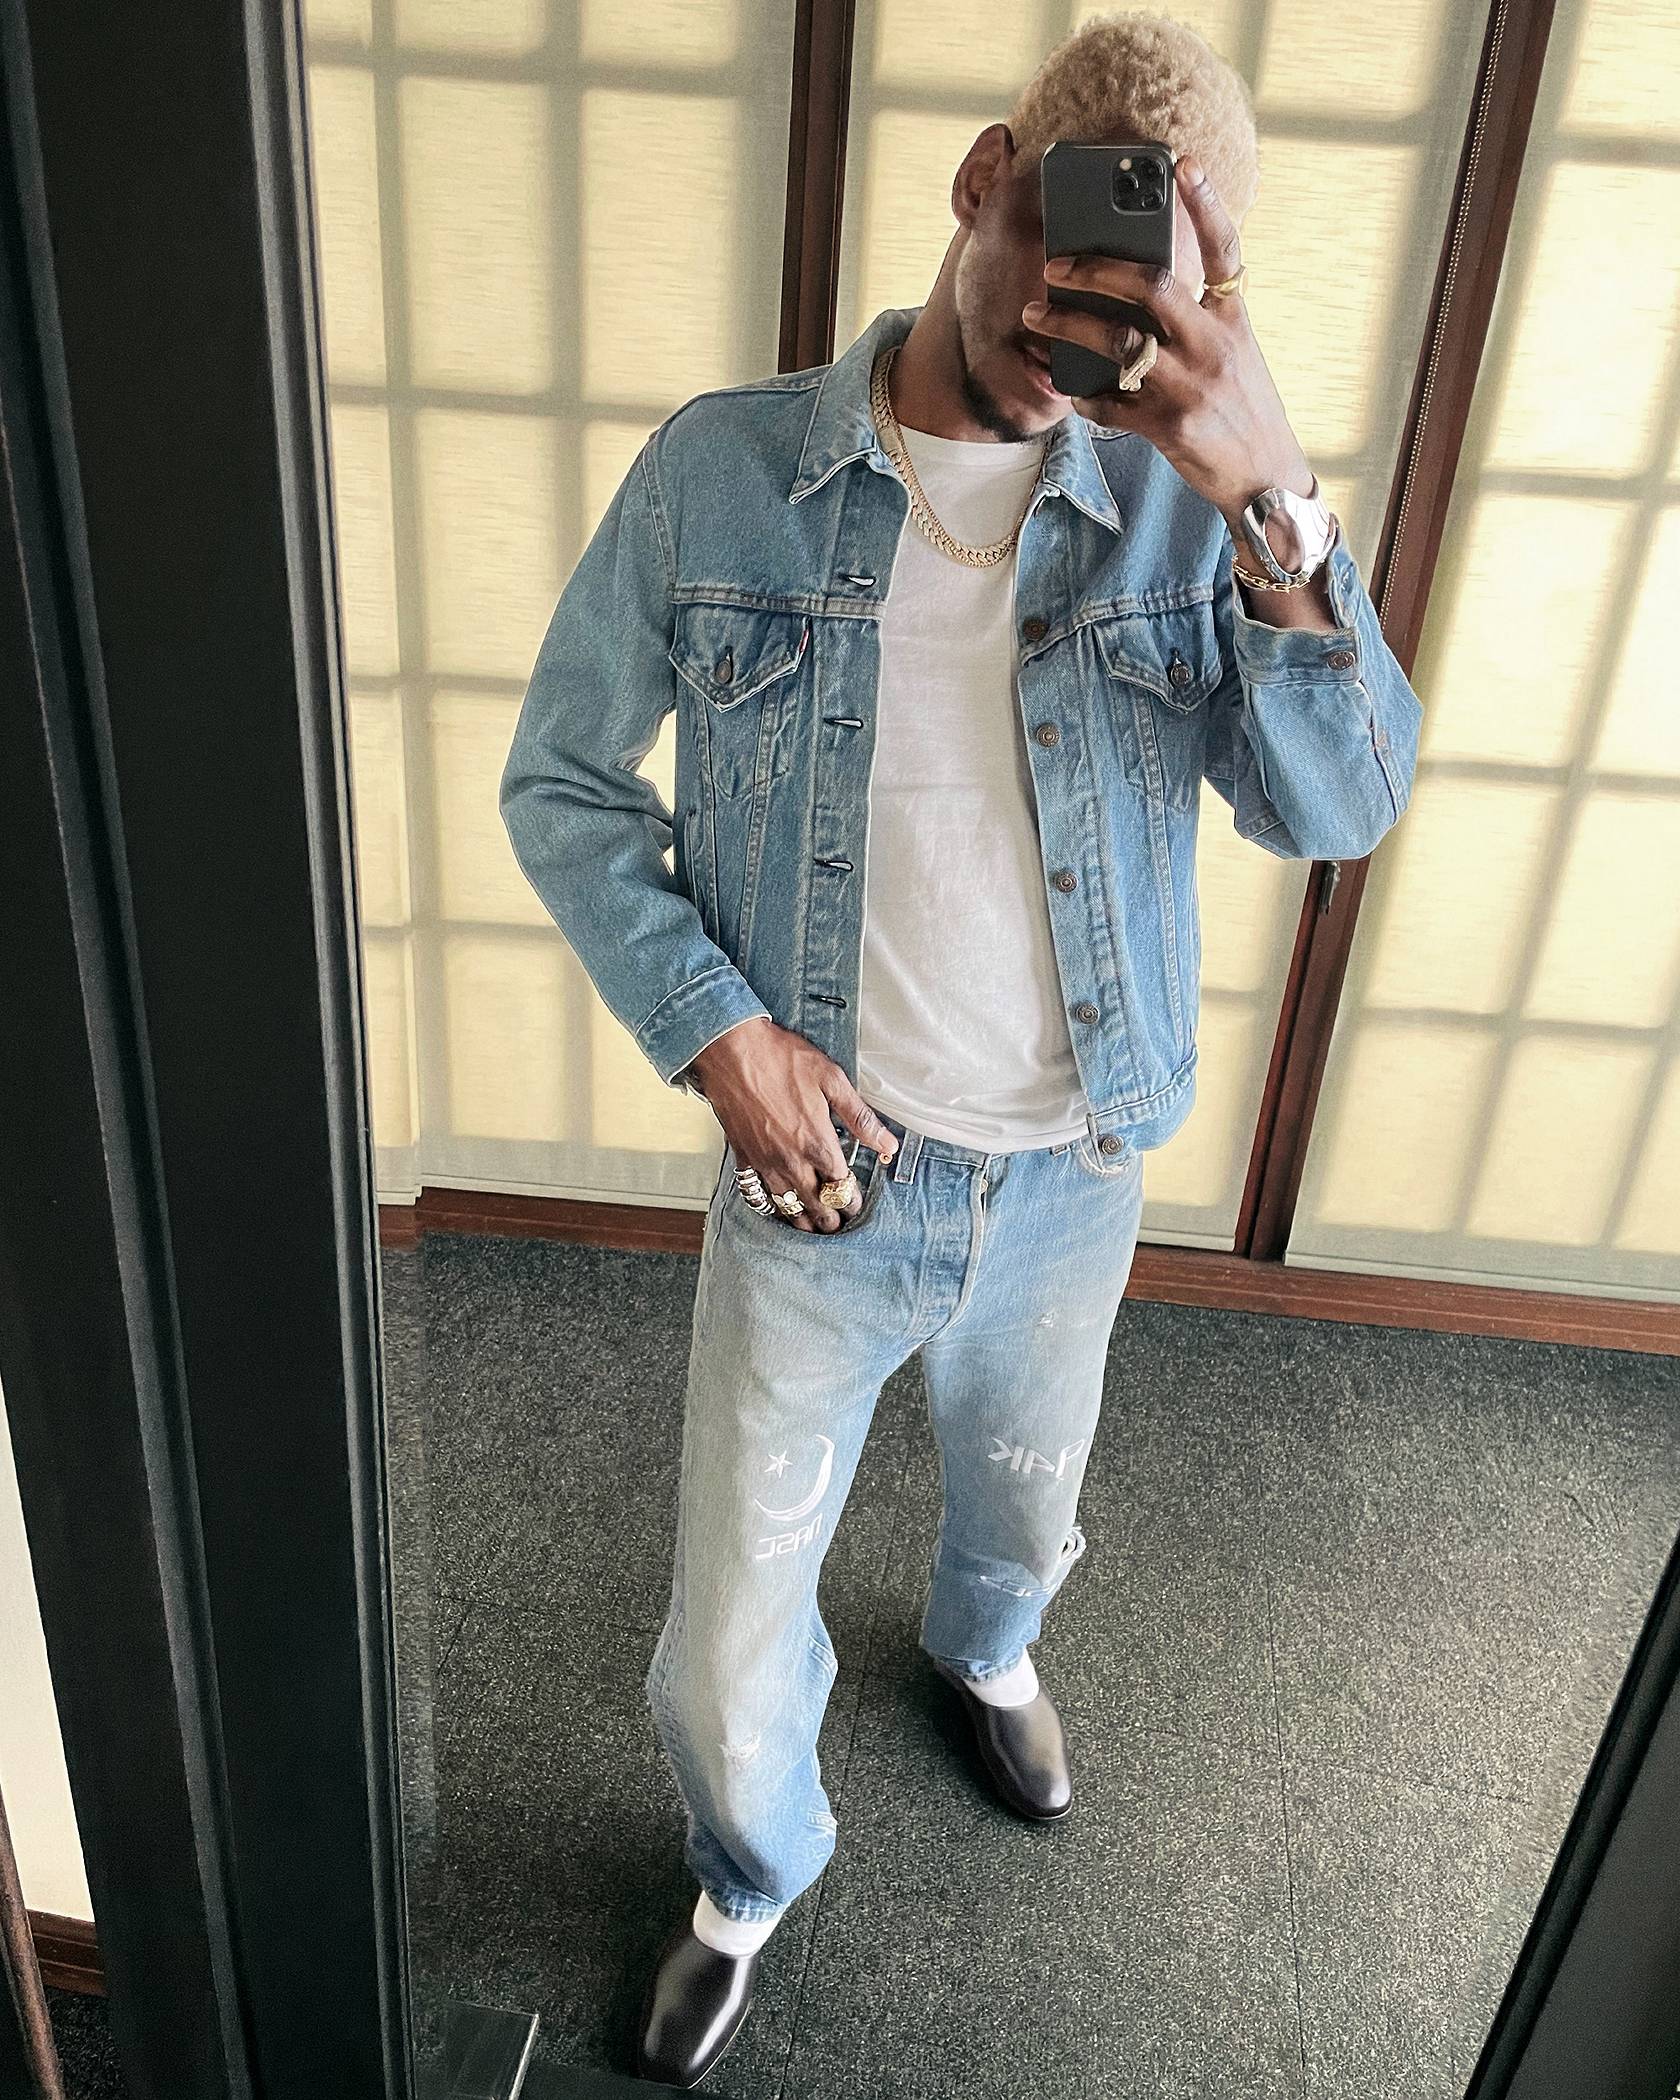 Image of man taking photo of his styled denim look